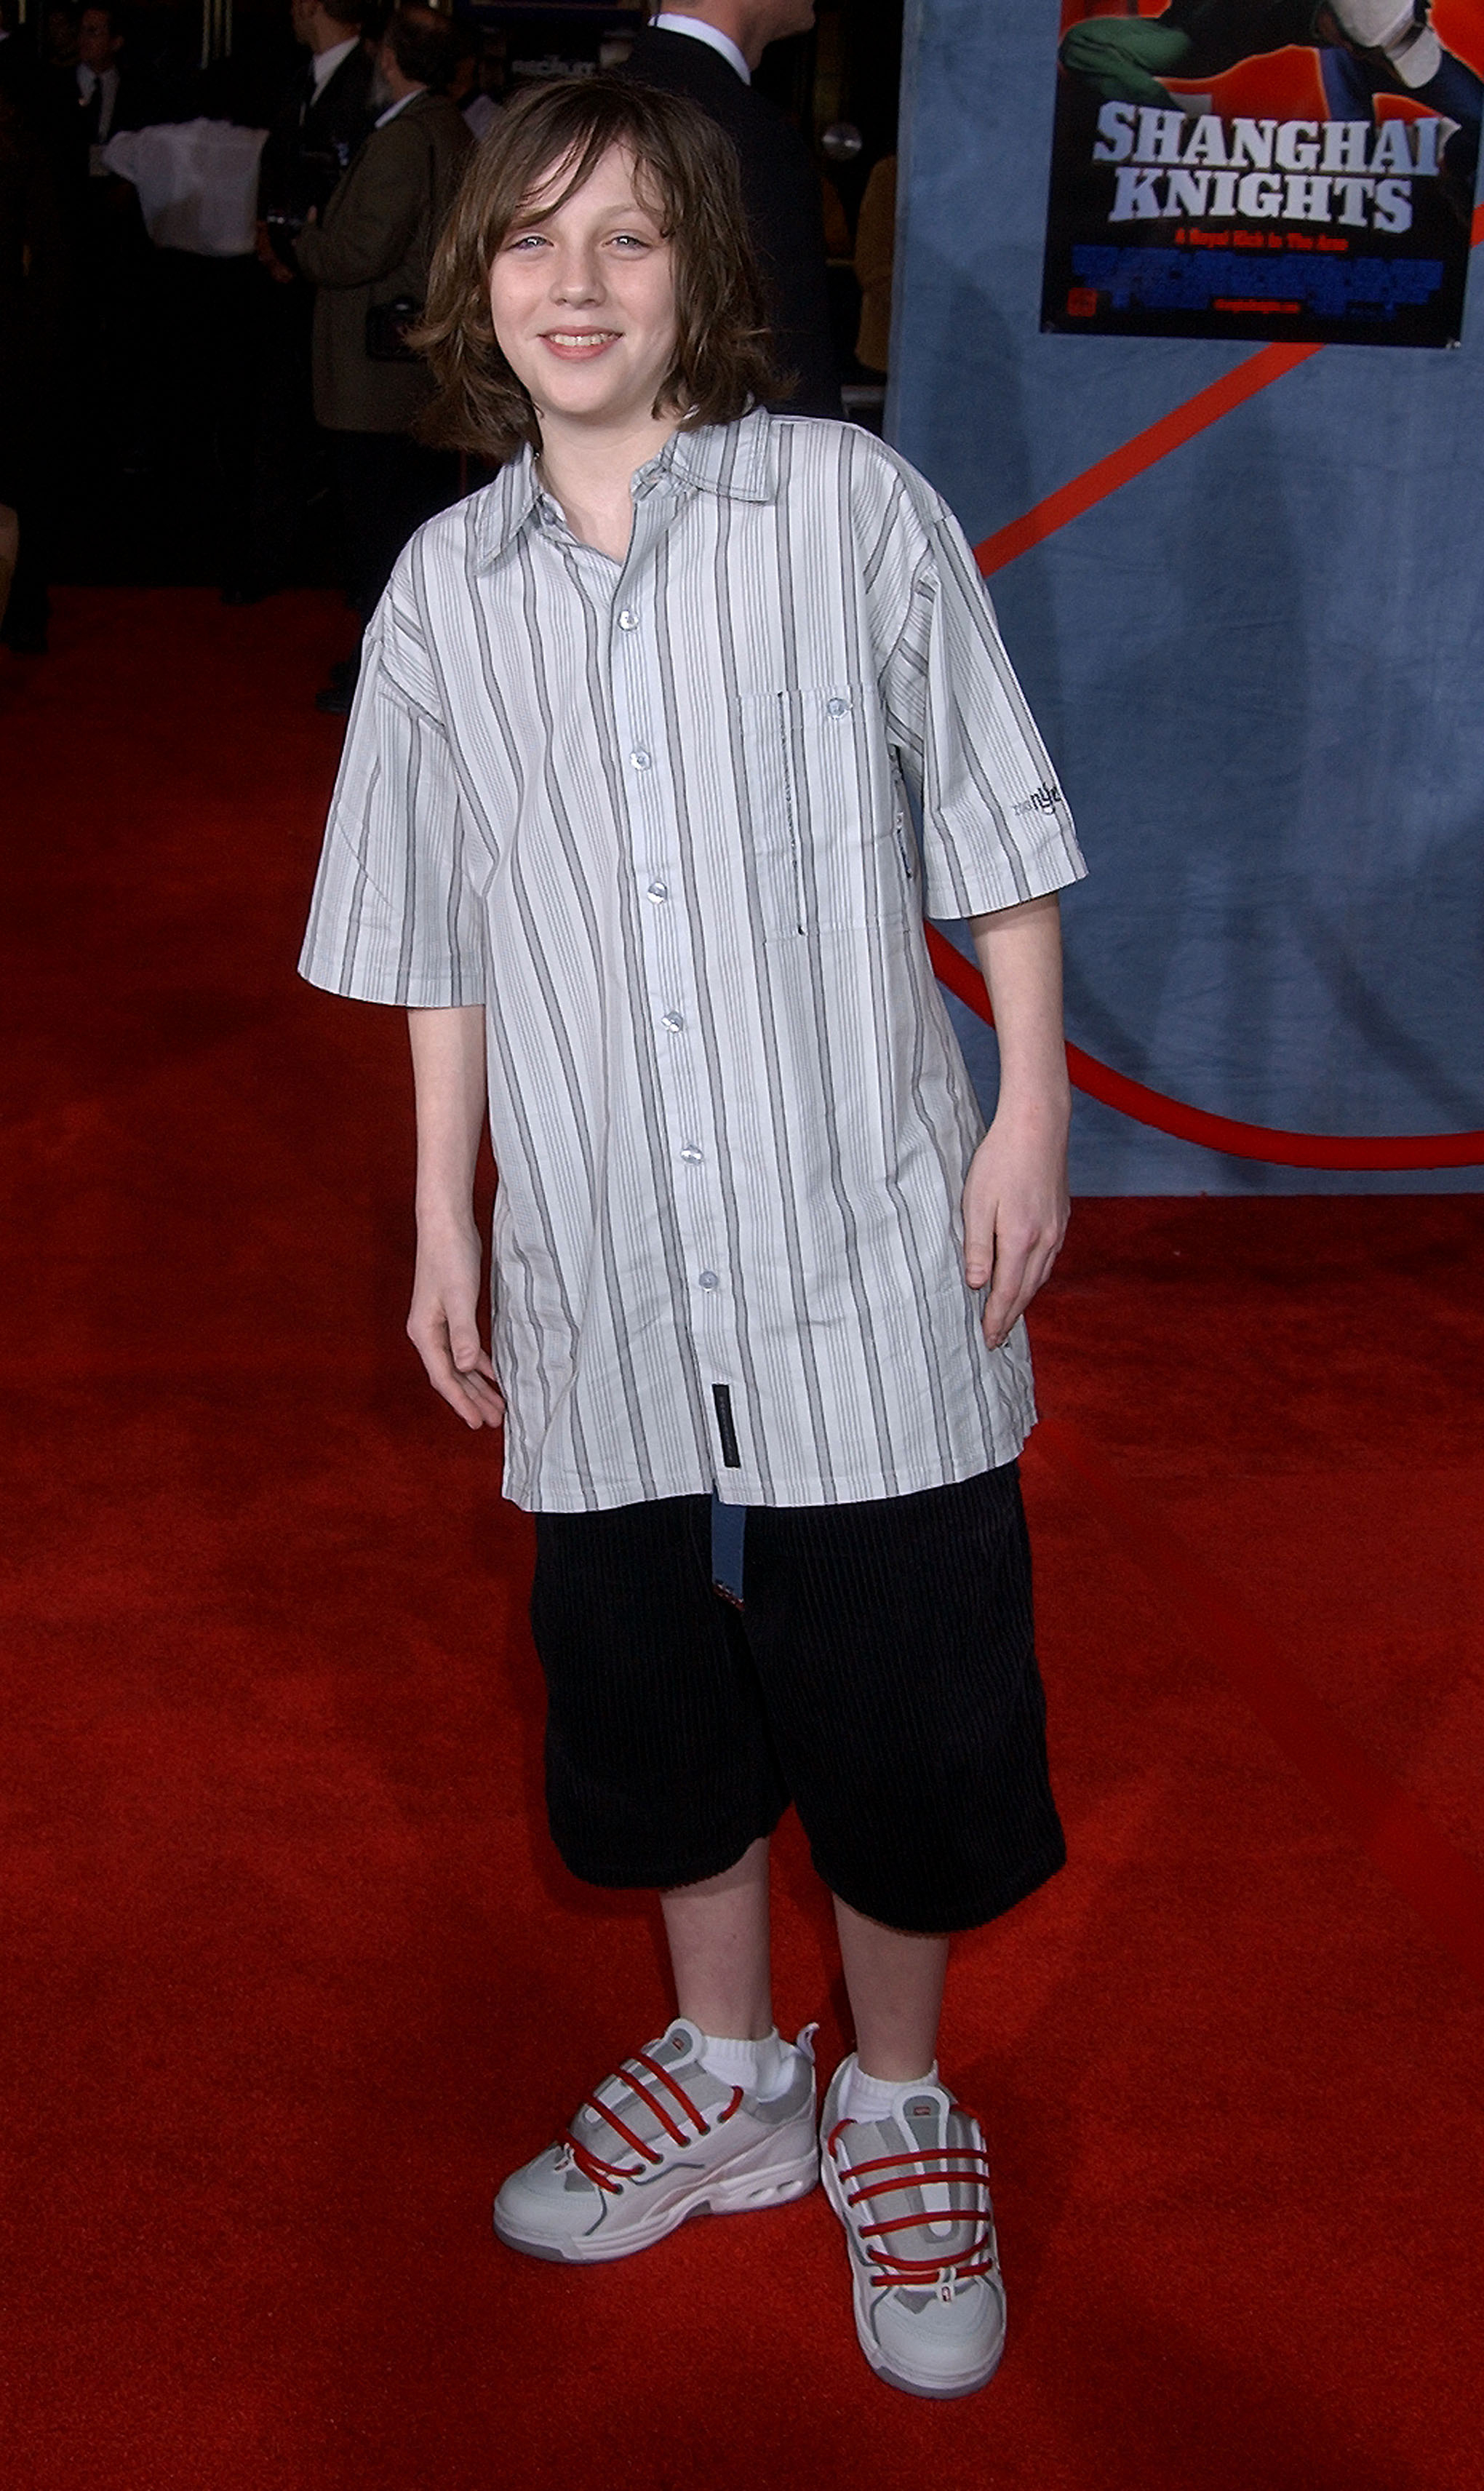 Aaron as a young boy in a striped shirt and dark shorts on the red carpet, smiling